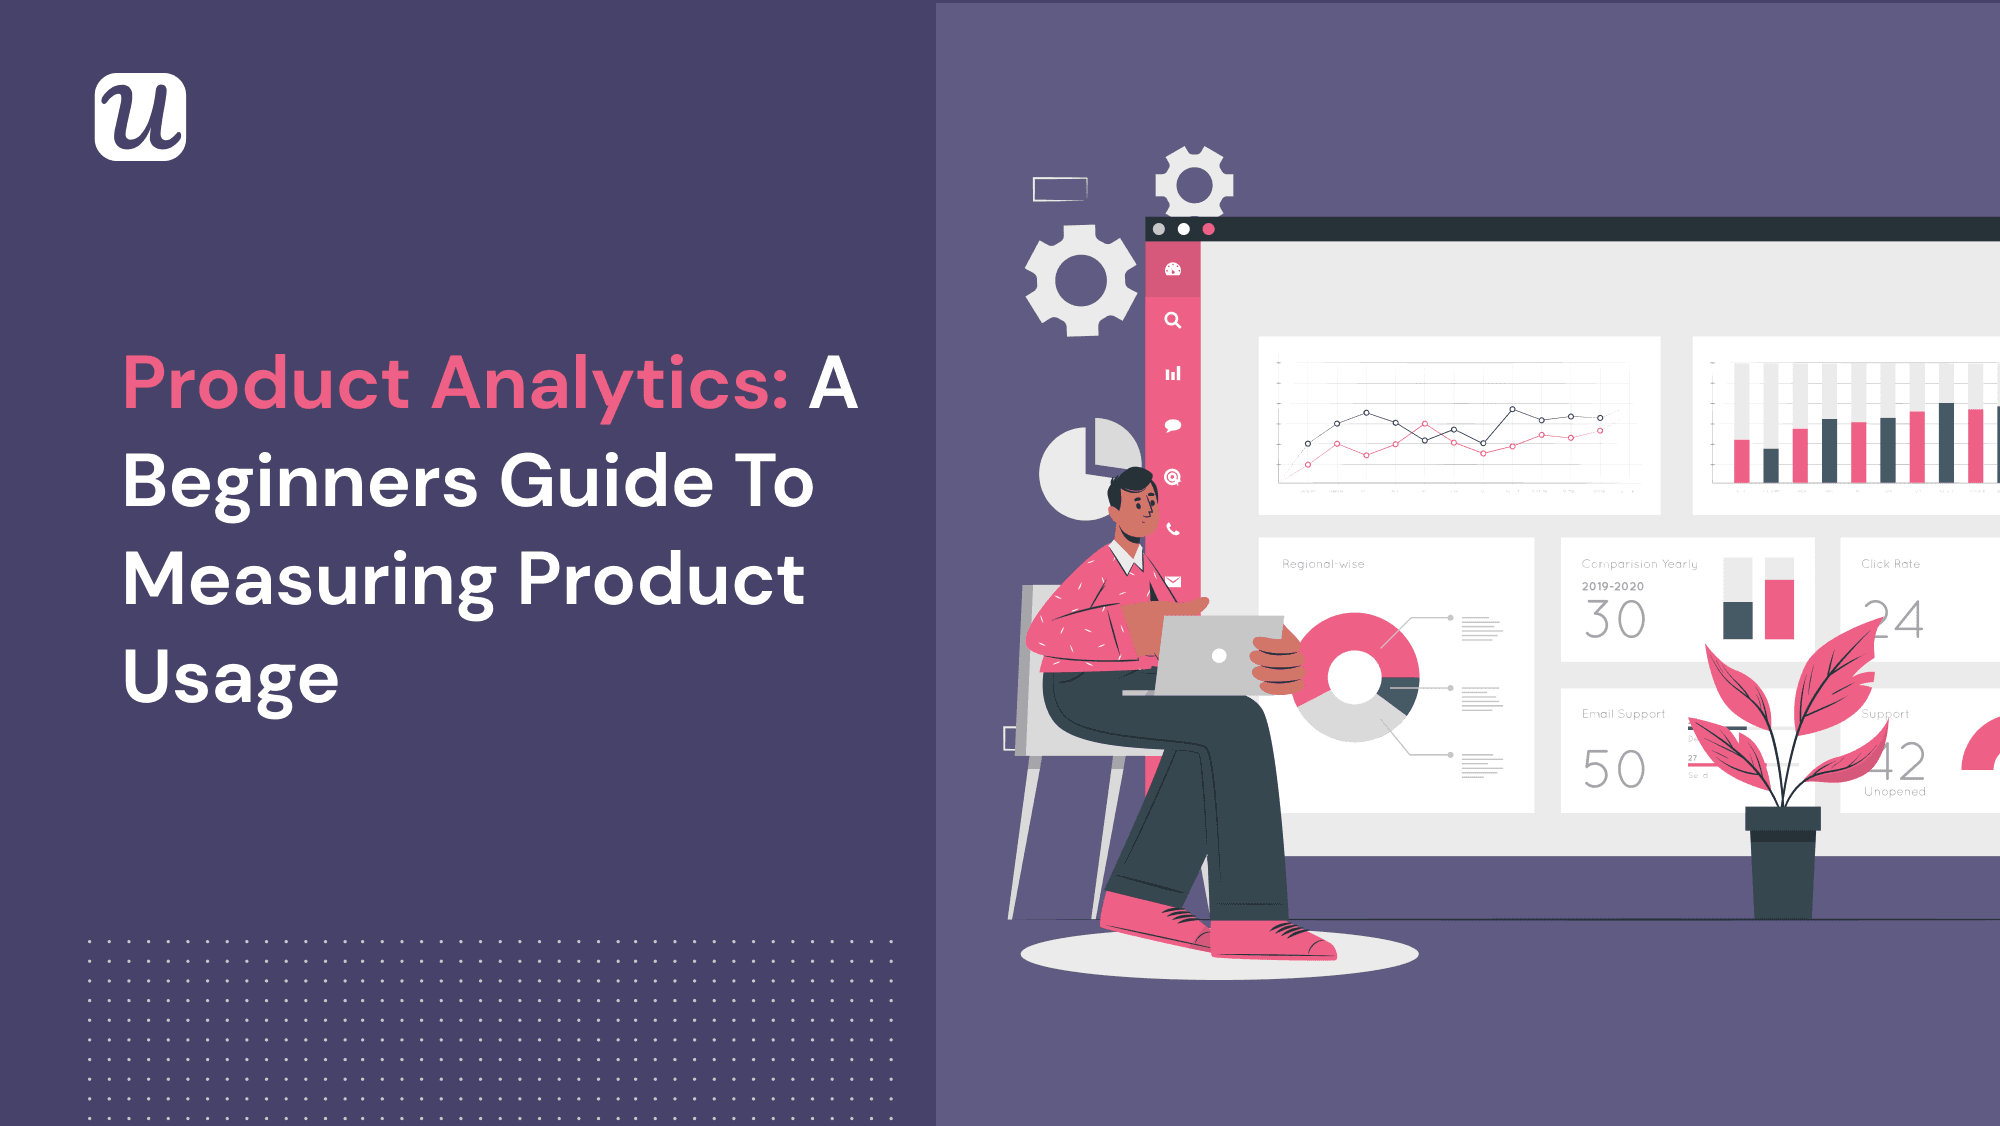 Product Analytics: A Beginner’s Guide To Measuring Product Usage + Product Analytics Tools